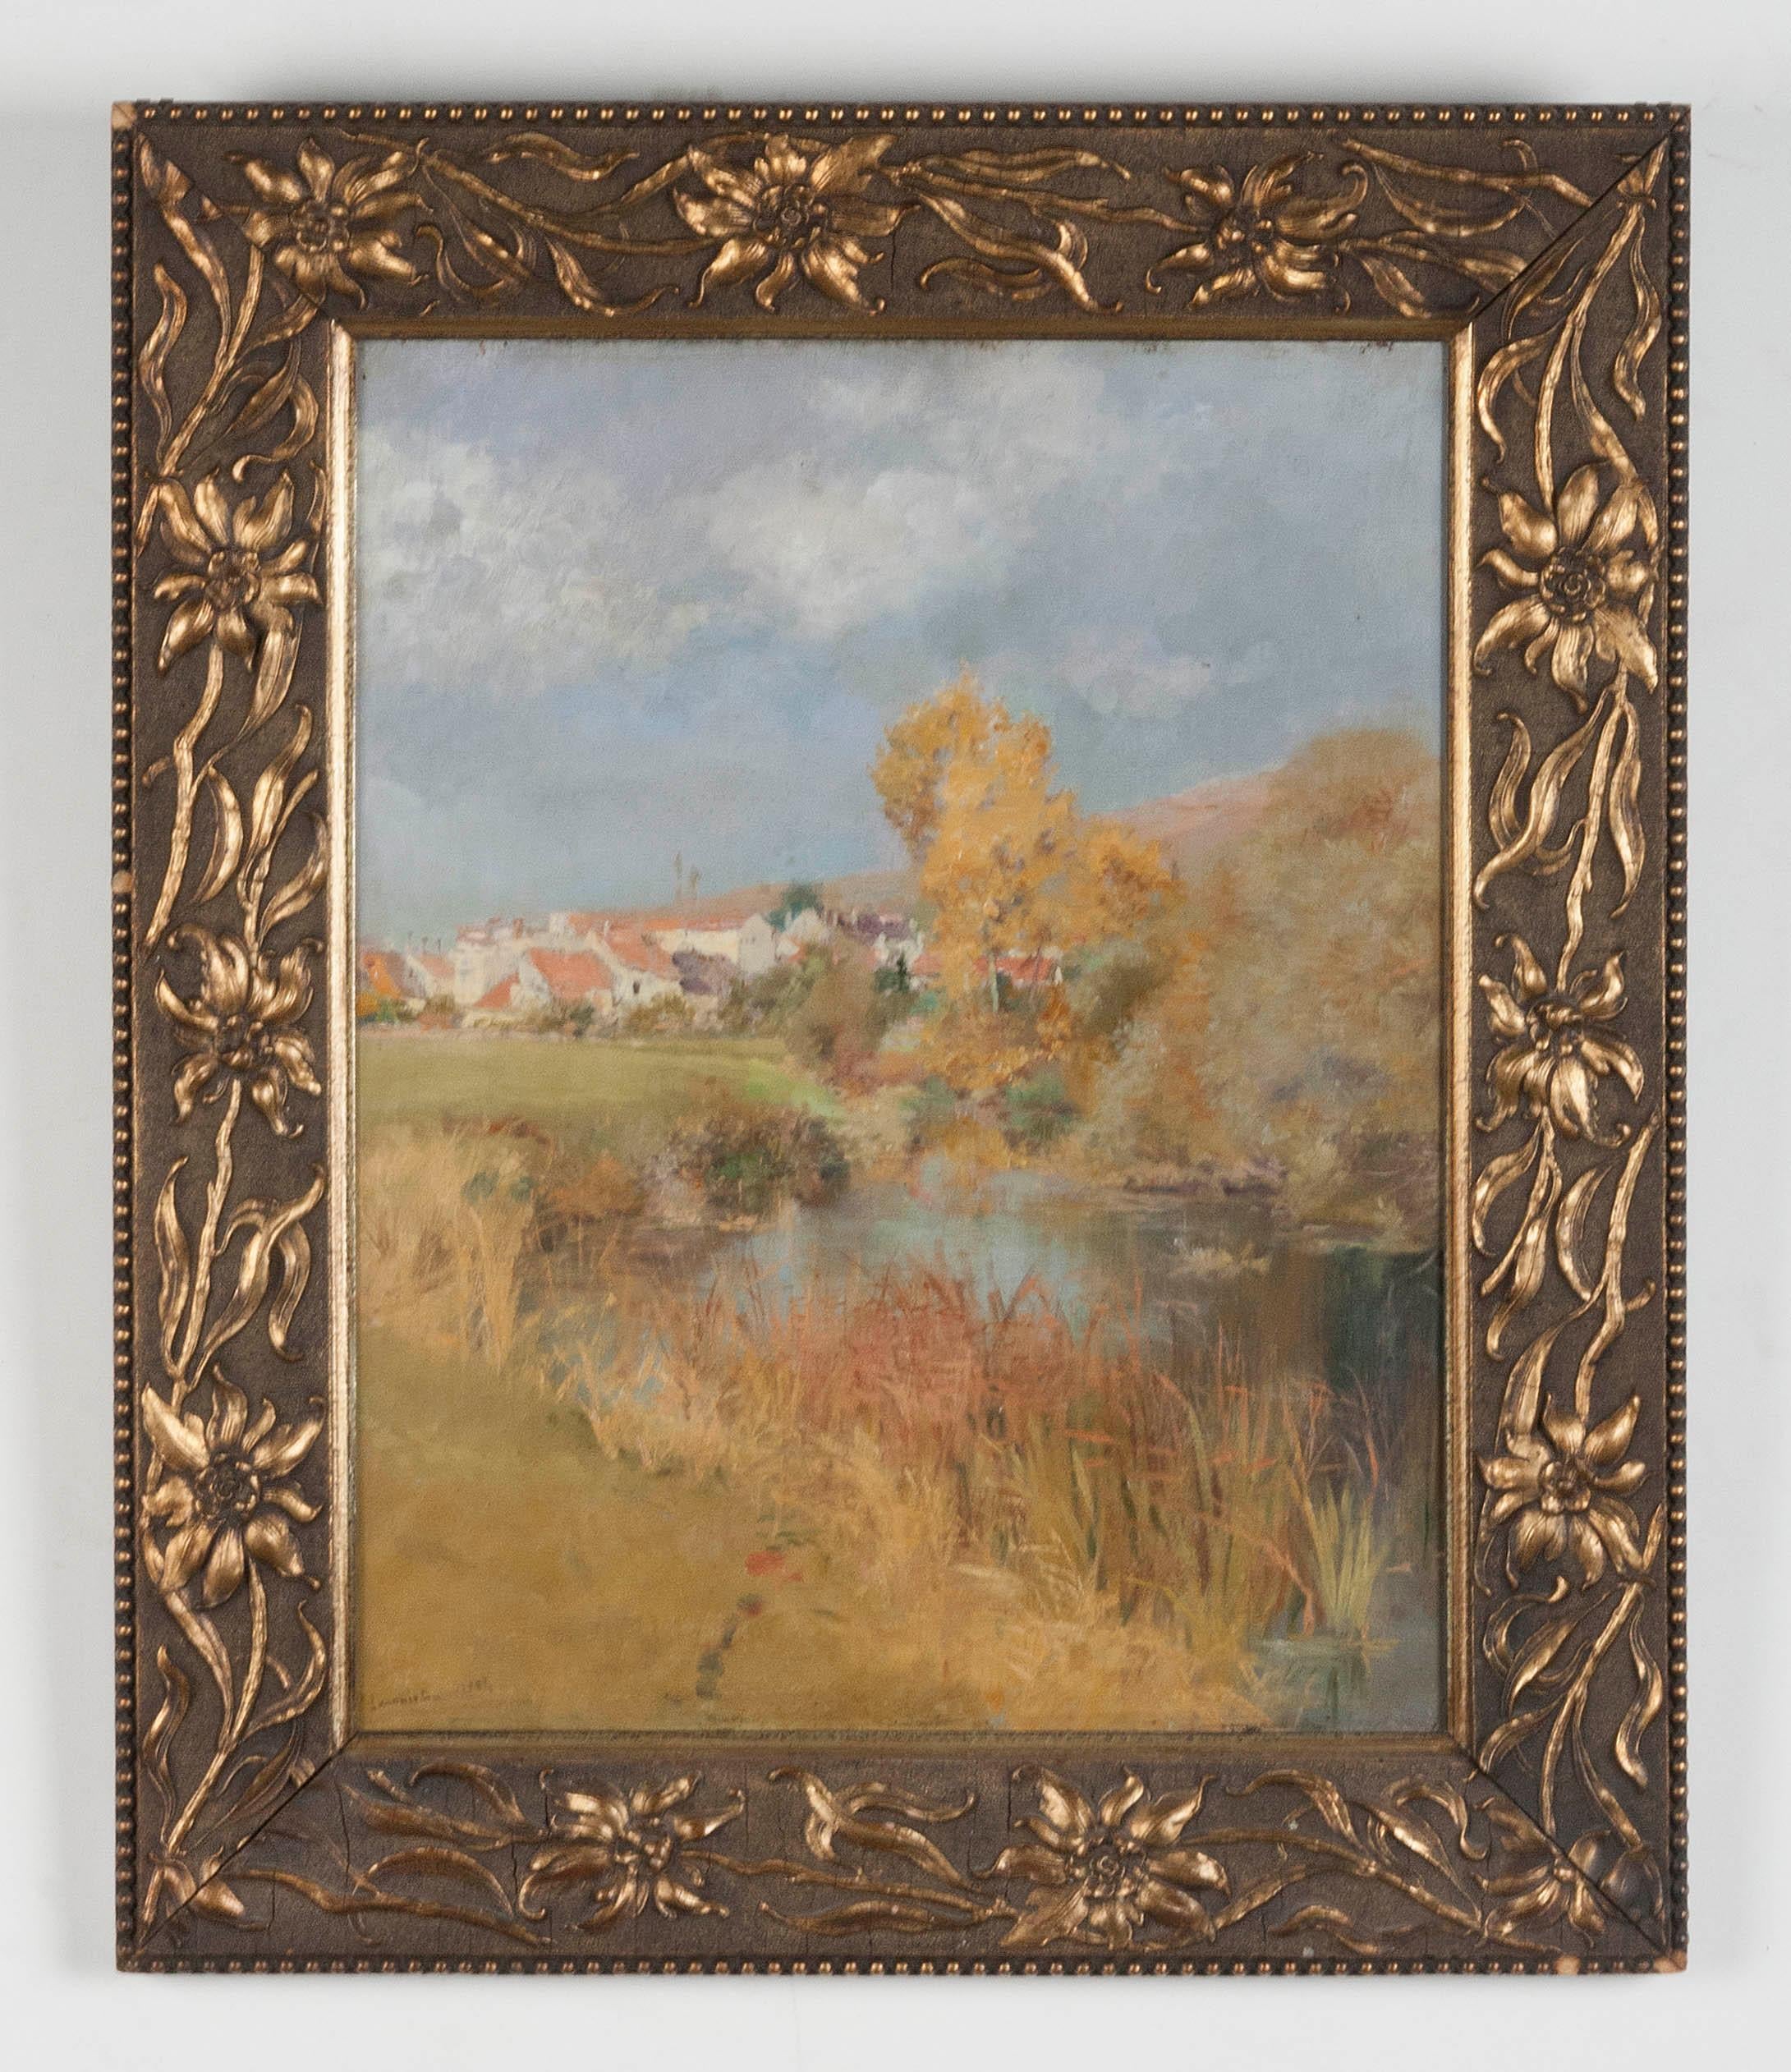 Impressionist painting by the Swiss painter Jeanniot. It is oil on a mahogany panel, the painting is signed in the lower left and dated 1884.
On the back is a label, presumably stuck on it by a previous owner, with information about the